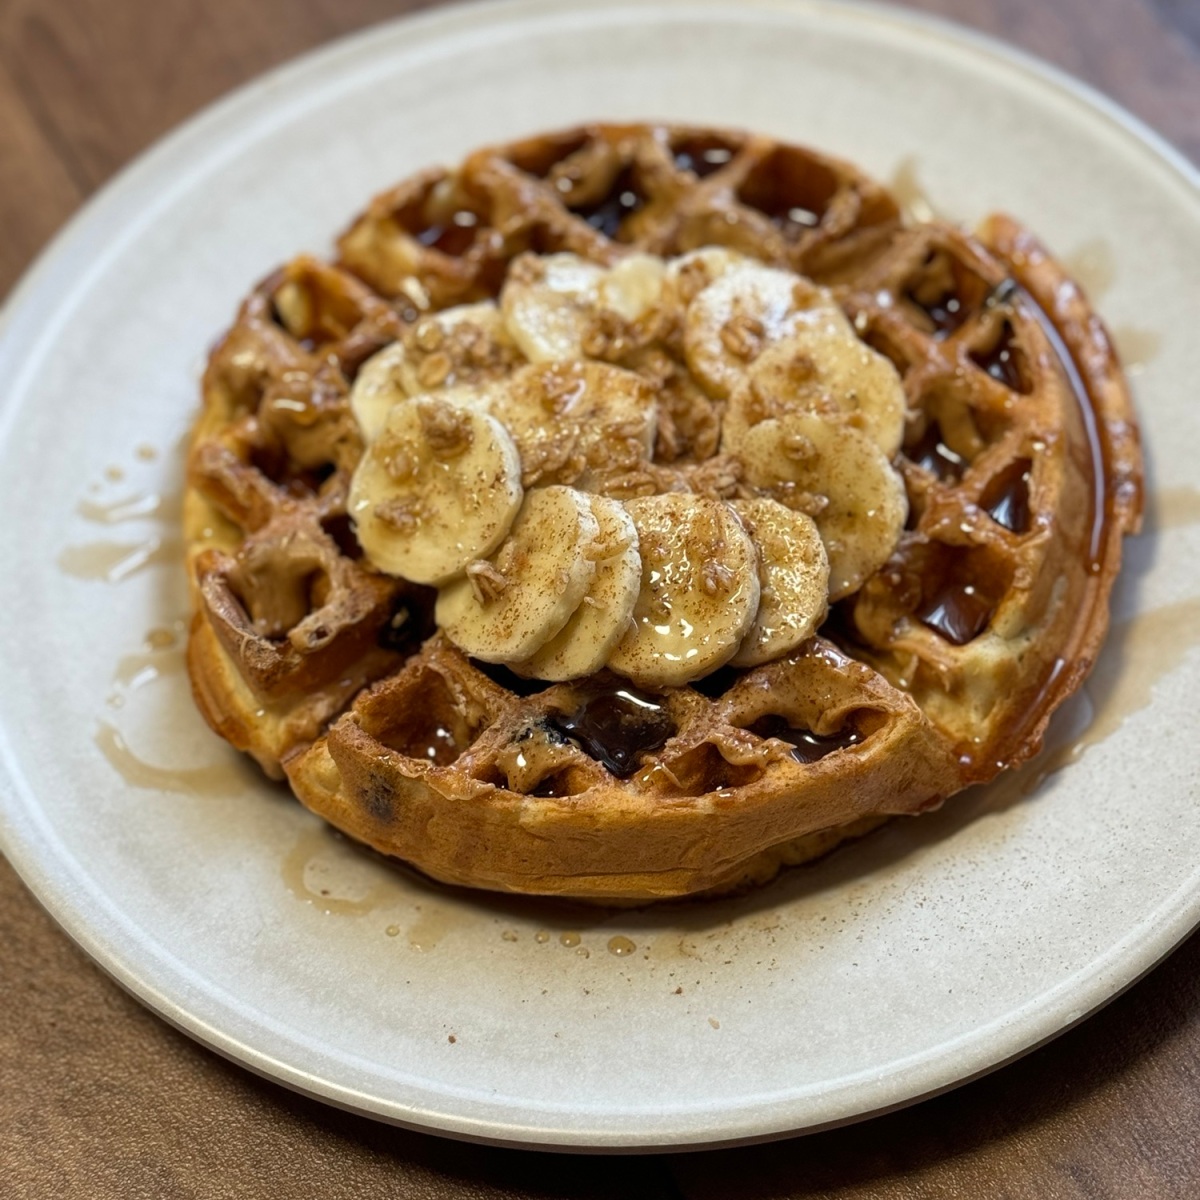 Chocolate Chip Belgian Waffle Topped with Peanut Butter and Banana